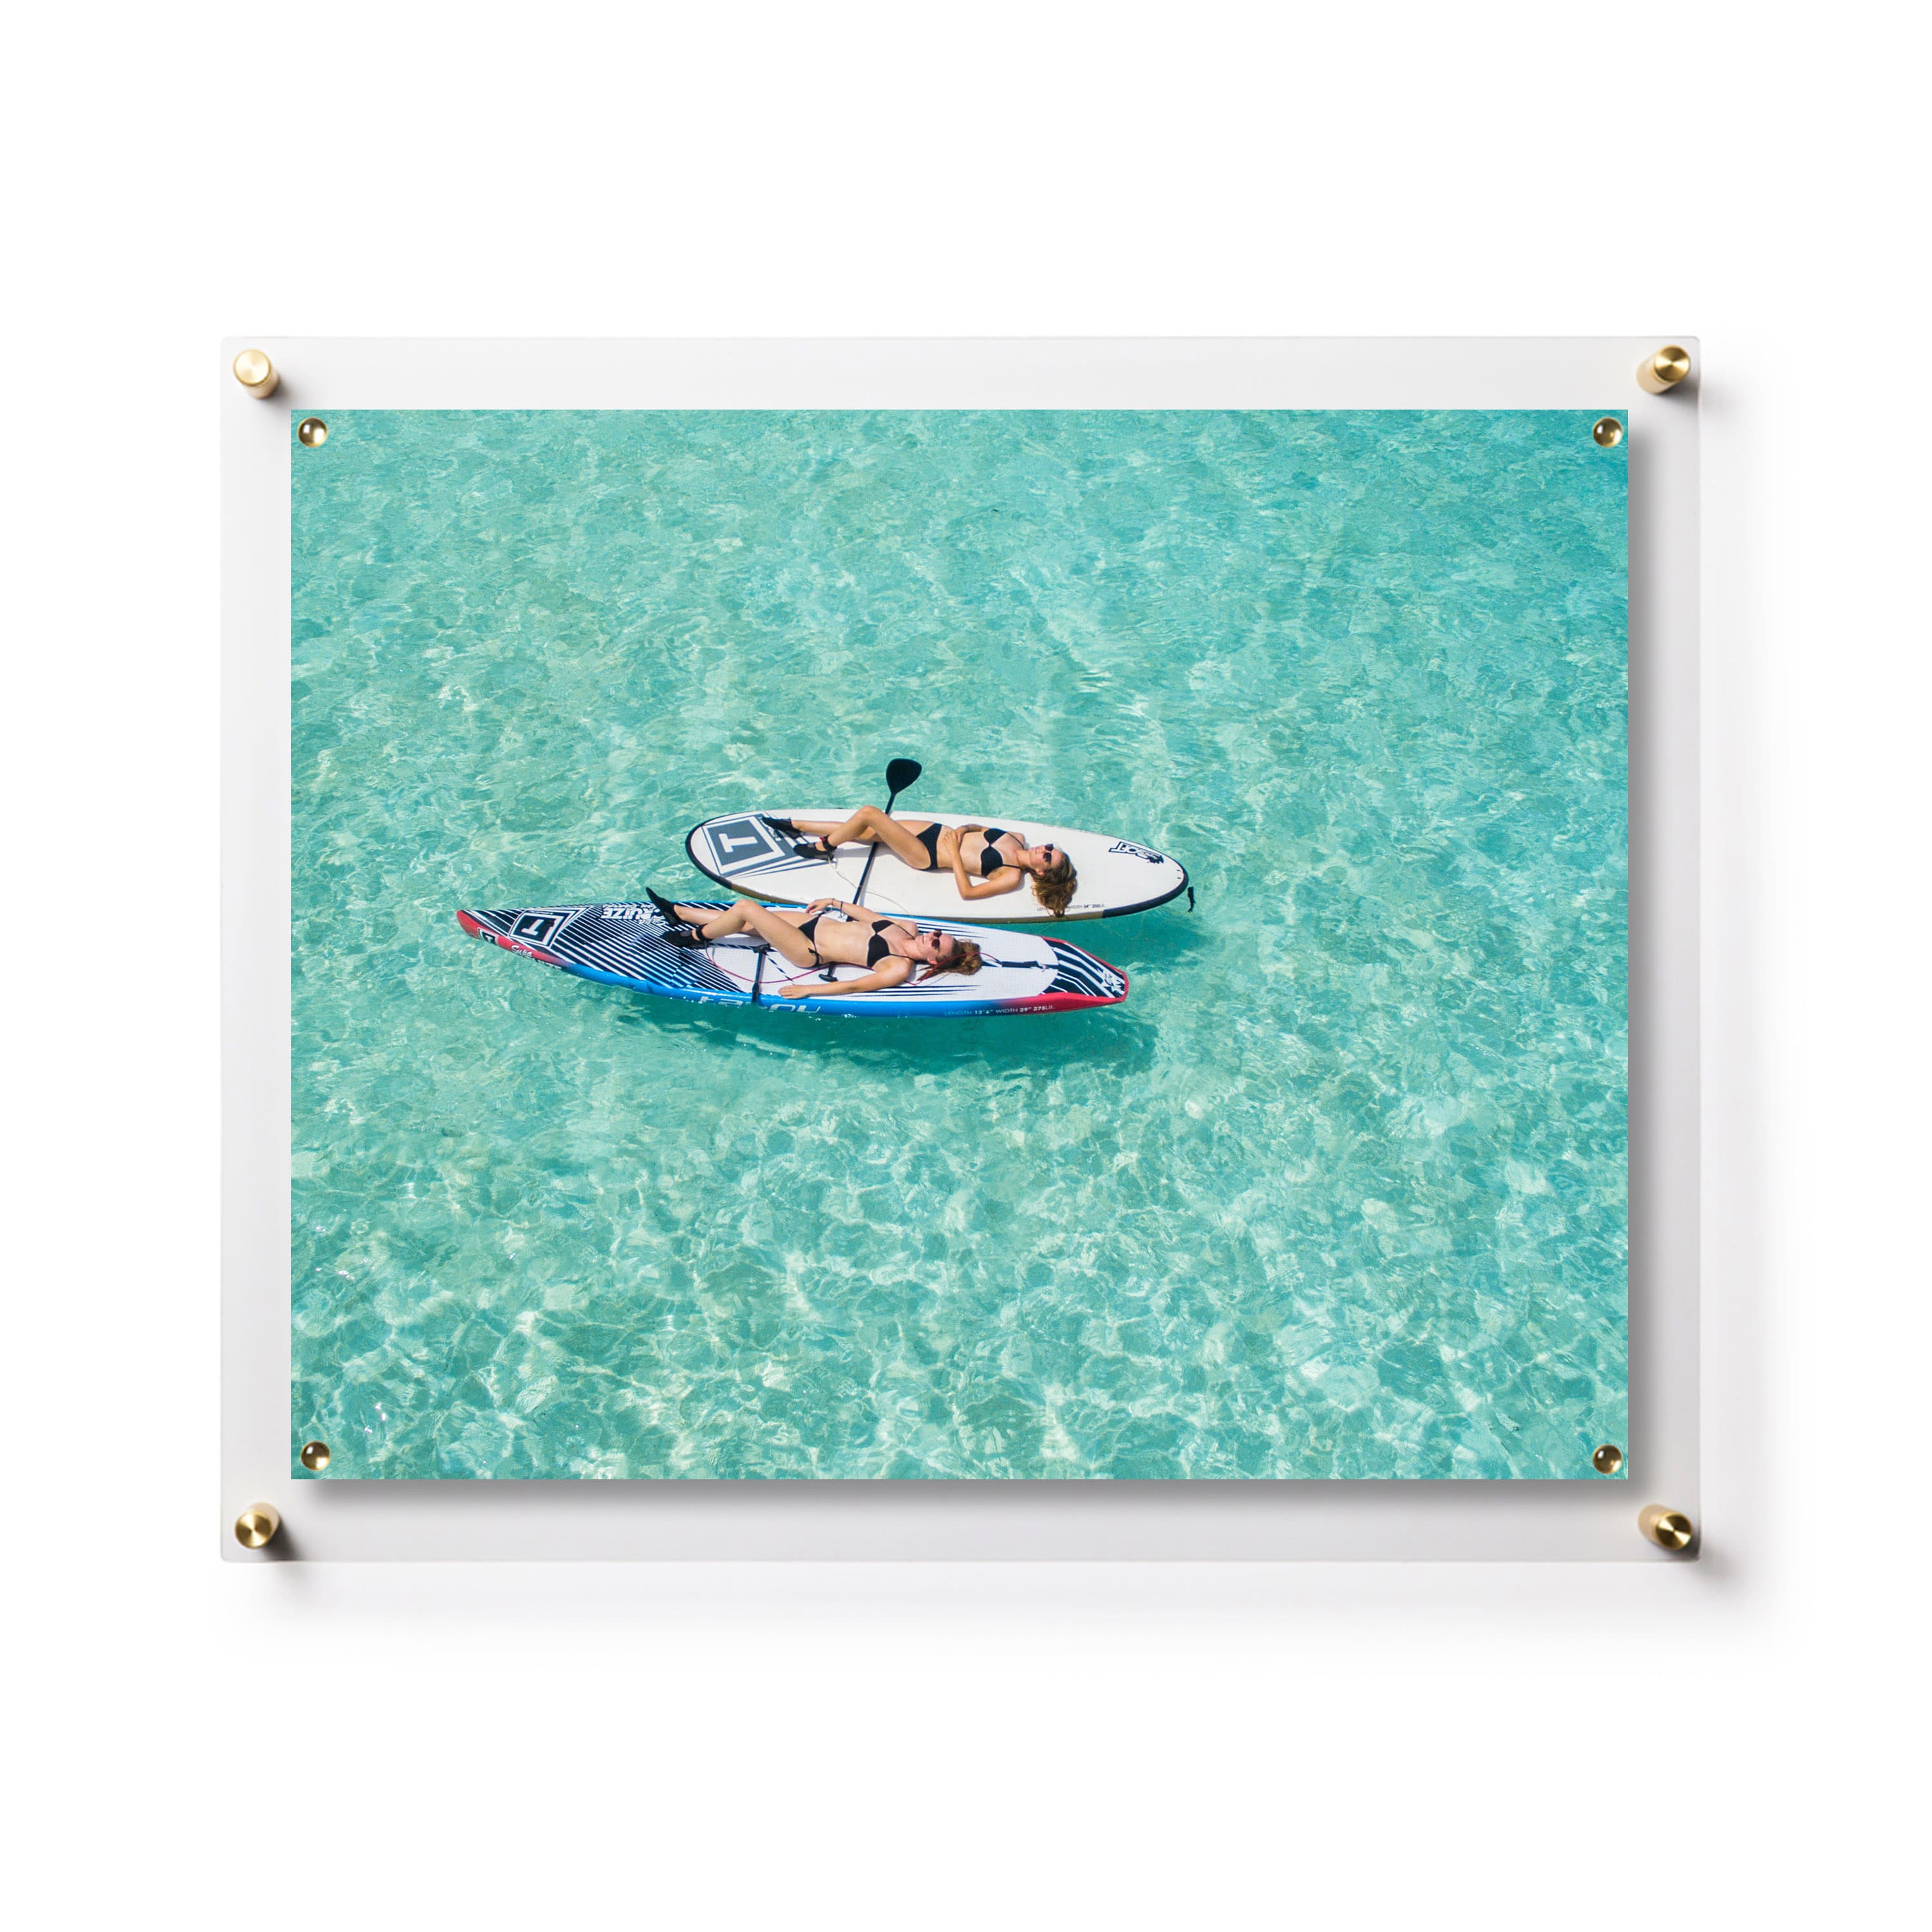 Wexel Art Floating Picture Frame Picture Size: 14 x 14